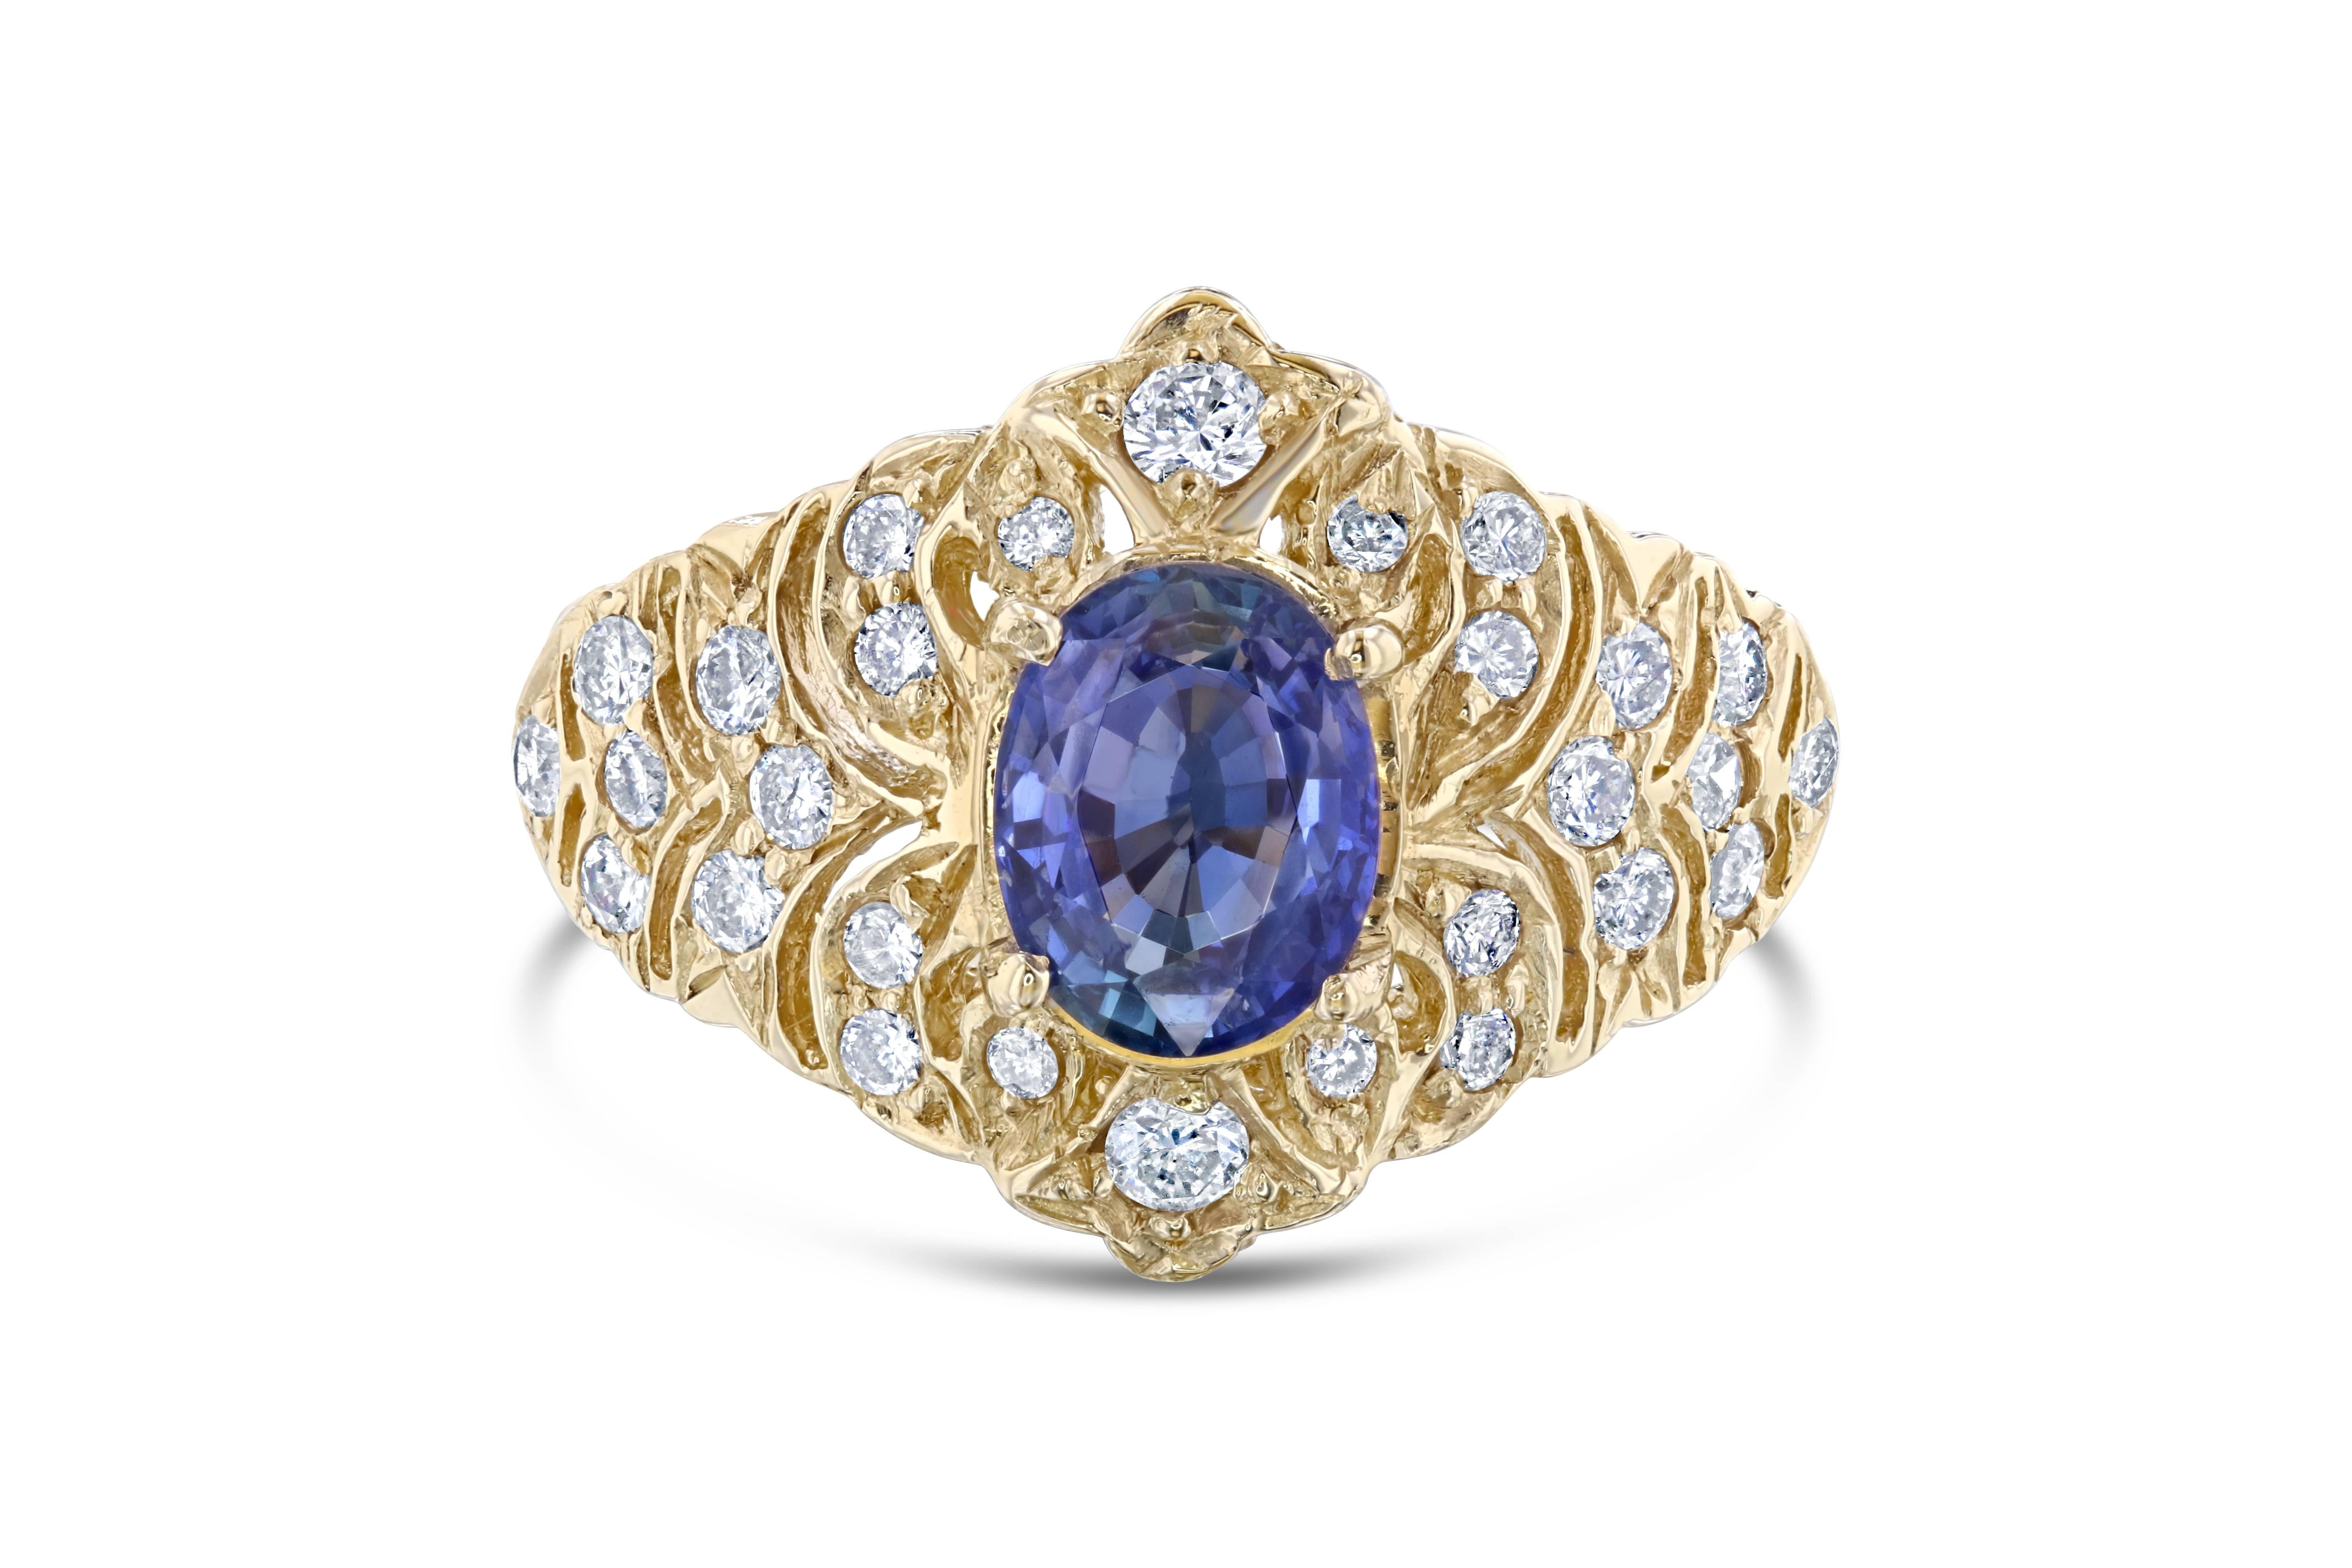 This unique ring is an art-deco inspired ring. It's beauty derives from the brilliant Blue Sapphire that weighs 1.58 Carats and has a cluster of 28 Round Cut Diamonds weighing 0.57 Carats. The total carat weight is 2.15 Carats. It is set in 14K